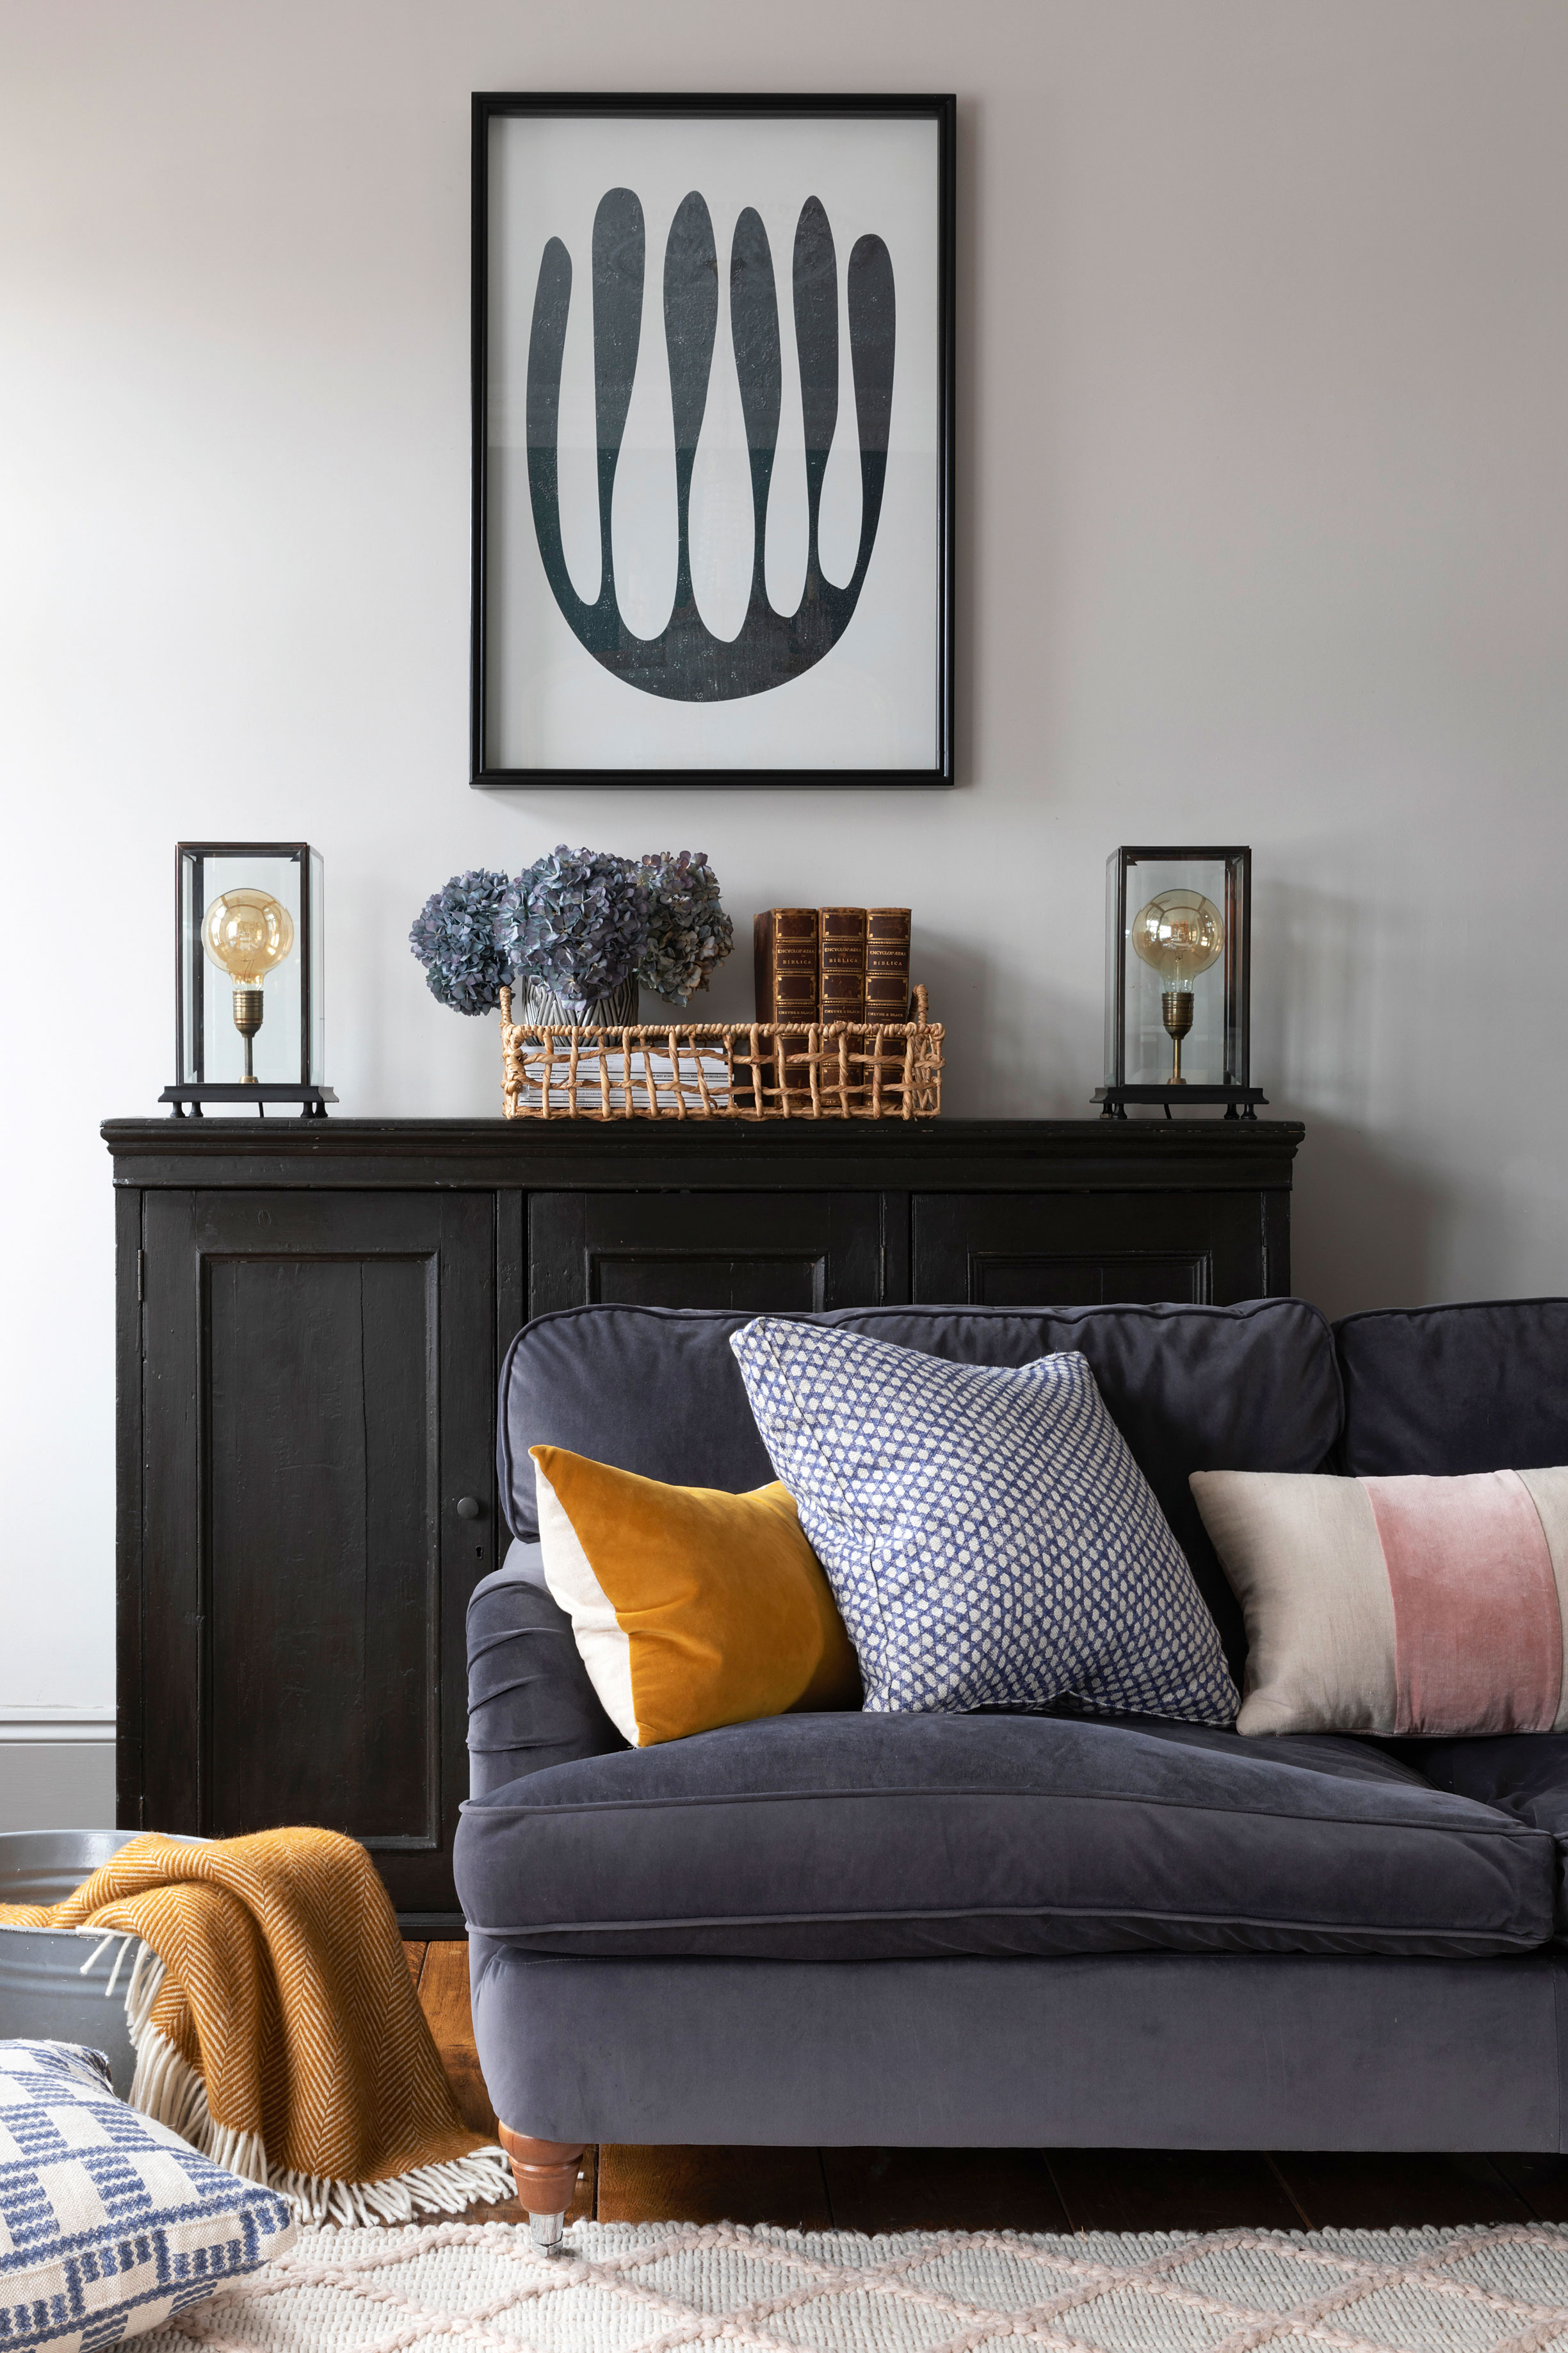 A grey living room with dark grey sofa, black living room cabinetry storage, monochrome abstract wall art, woven basket, Edison-style decorative lights and mustard, blue and pink cushions on sofa